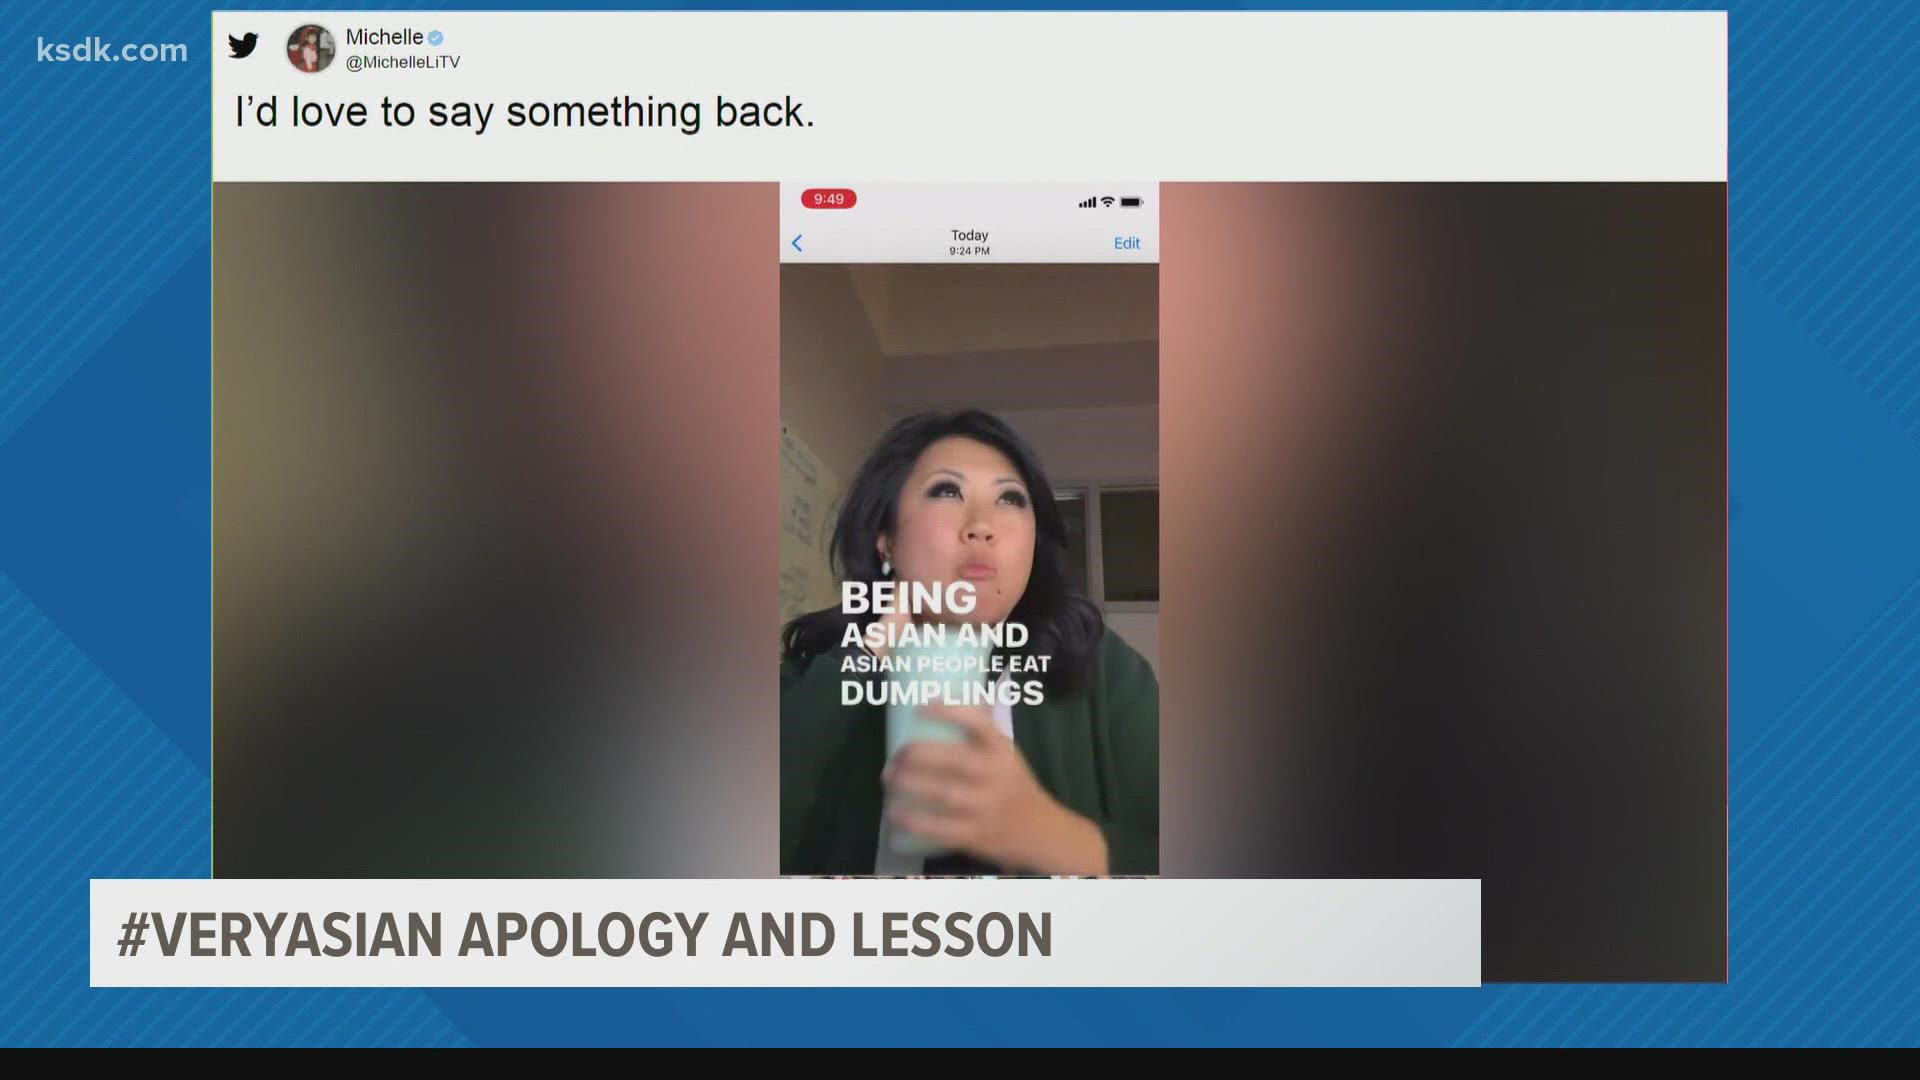 Michelle Li spoke with the woman who left the message and accepted her apology. She now wants to use it as a way to move forward.